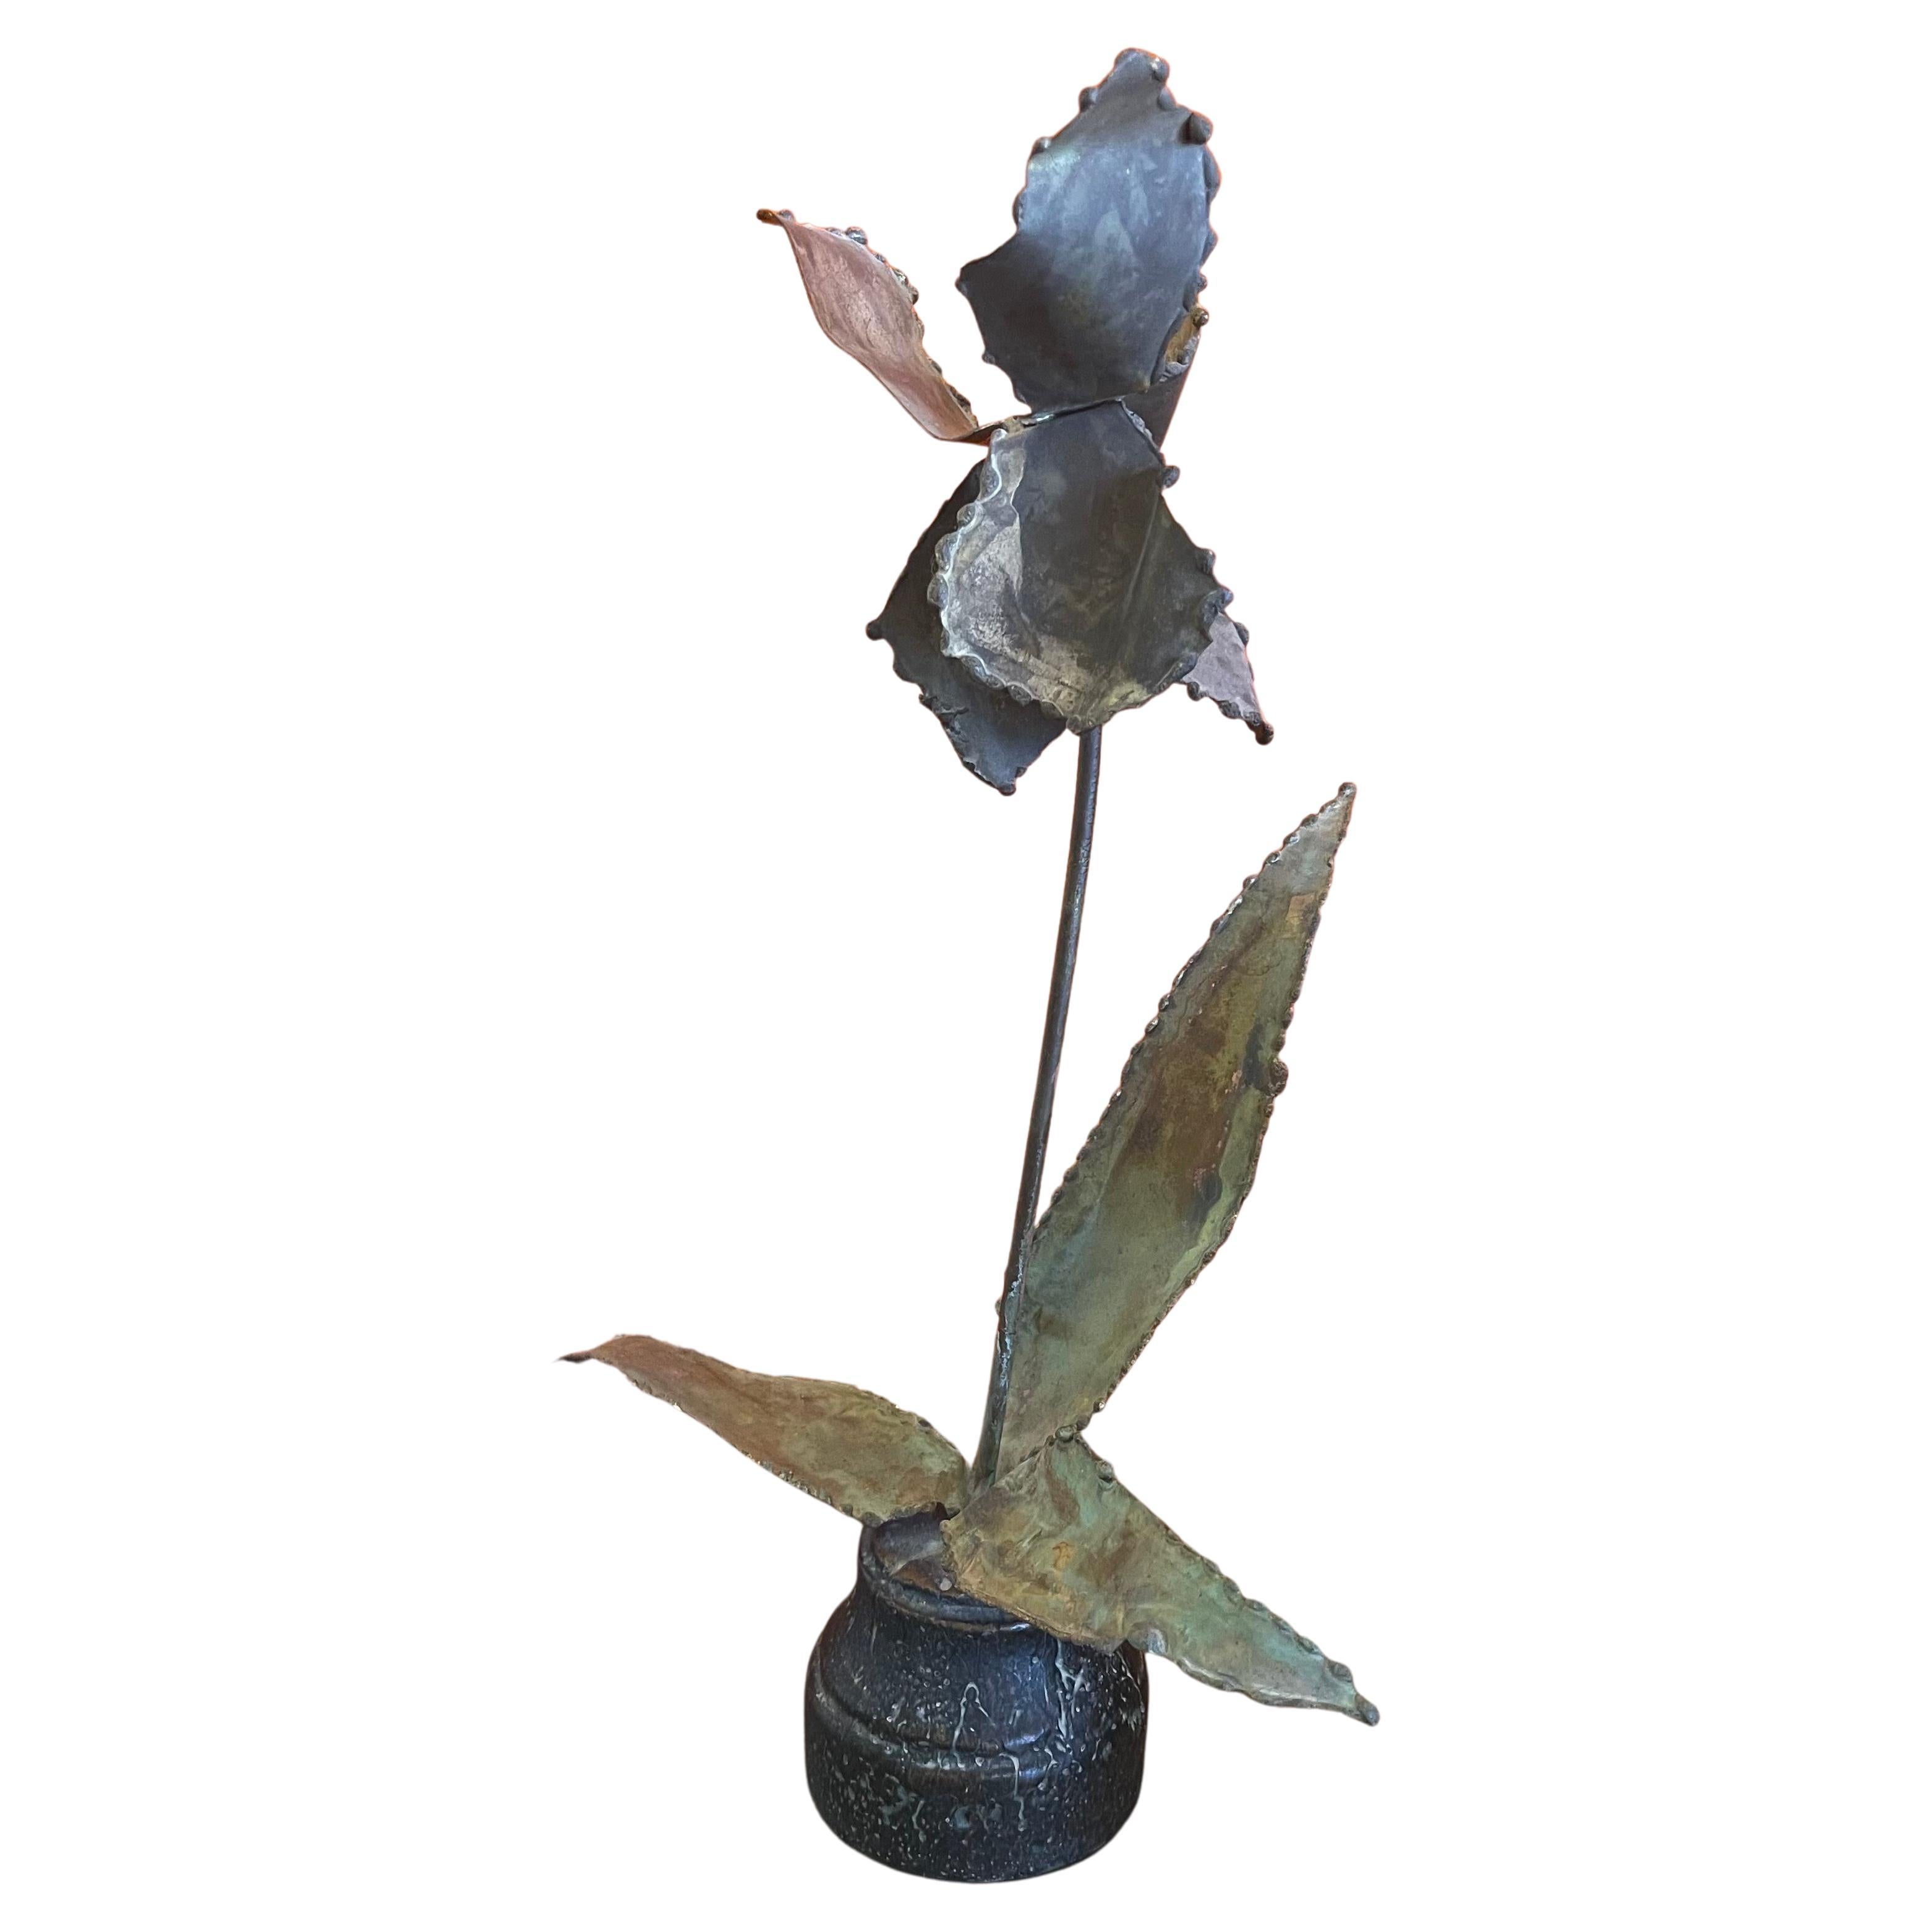 Brutalist raw metal torch cut flower sculpture, circa 1983. The sculpture is in very good vintage condition and measures 10